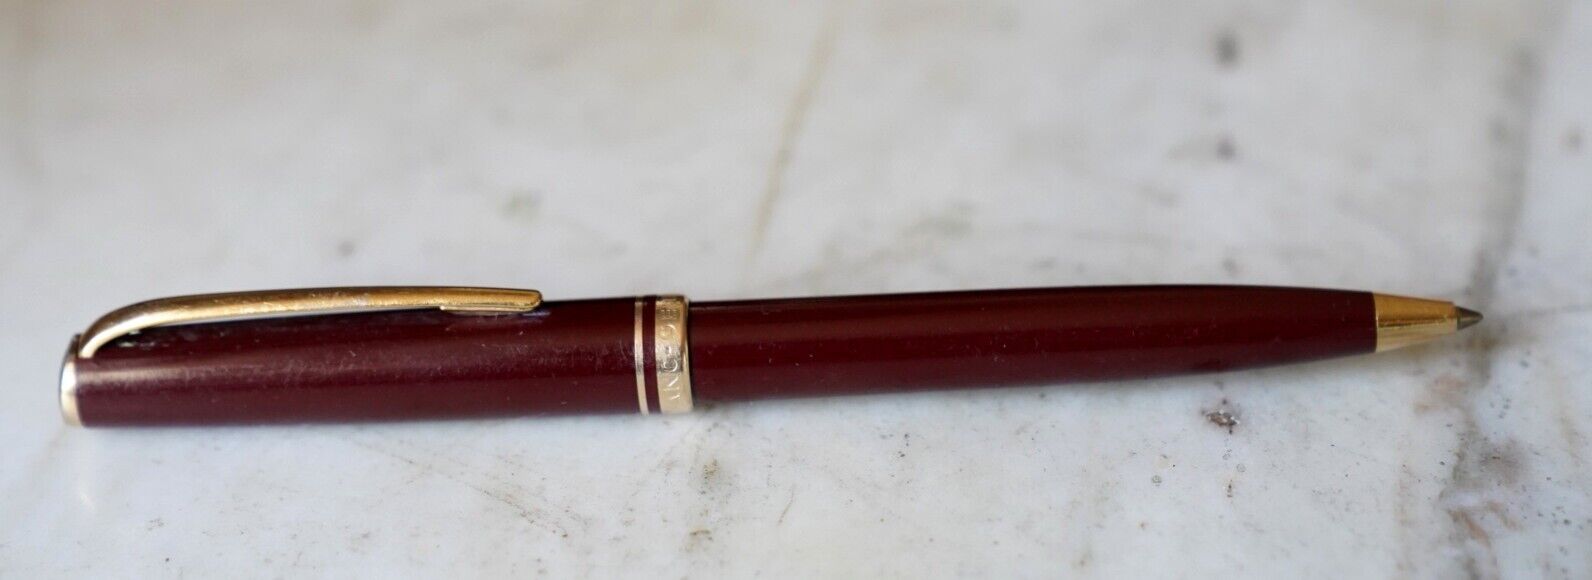 MONTBLANC GENERATION RUBY RED RESIN BALL PEN - GOLD PLATED 18 CARATS - BEAUTIFUL